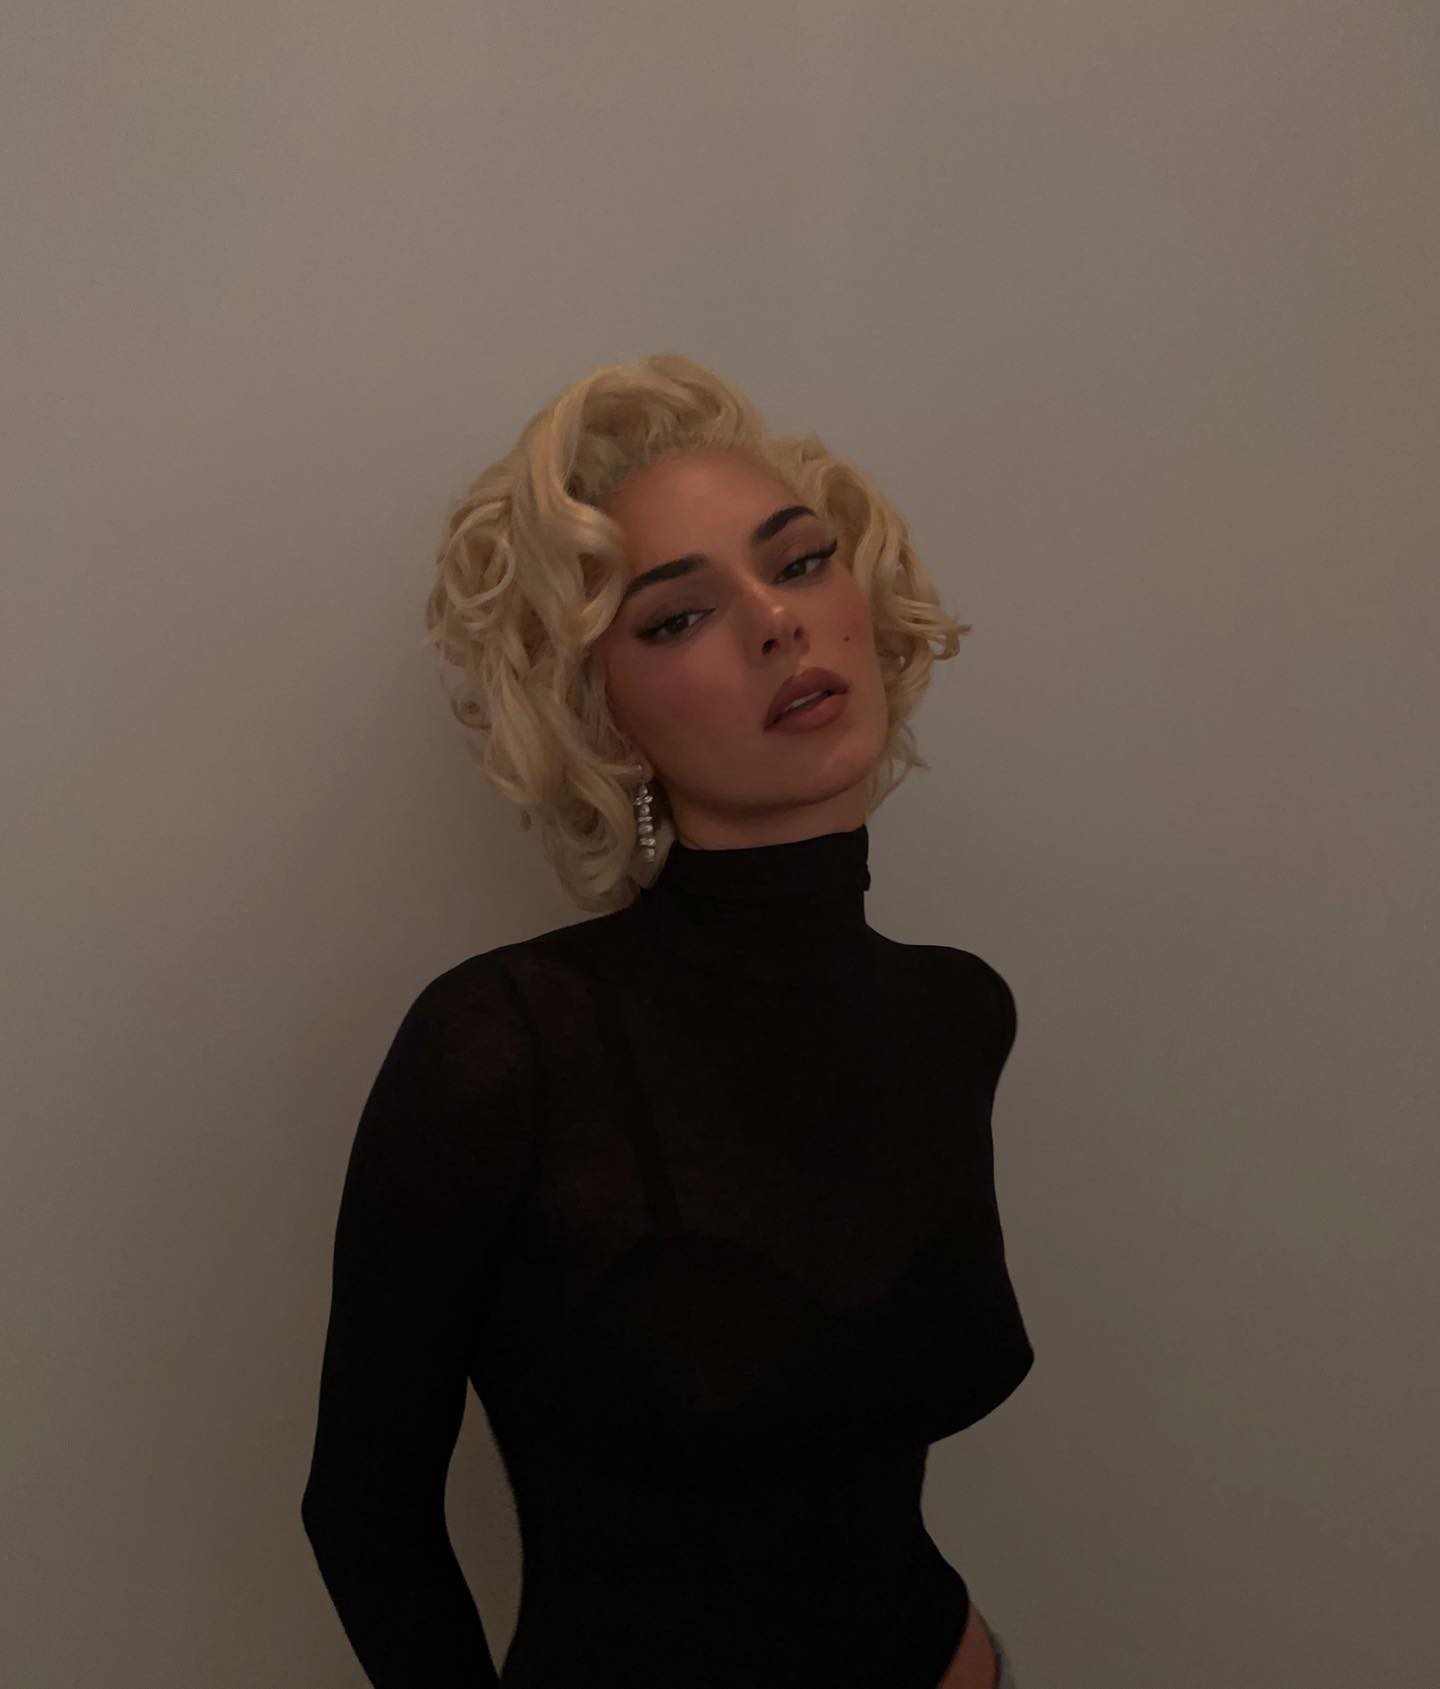 Kendall Jenner seen dressed as Marilyn Monroe for Halloween 2023 with a blonde wig, black dress, and pearl earrings